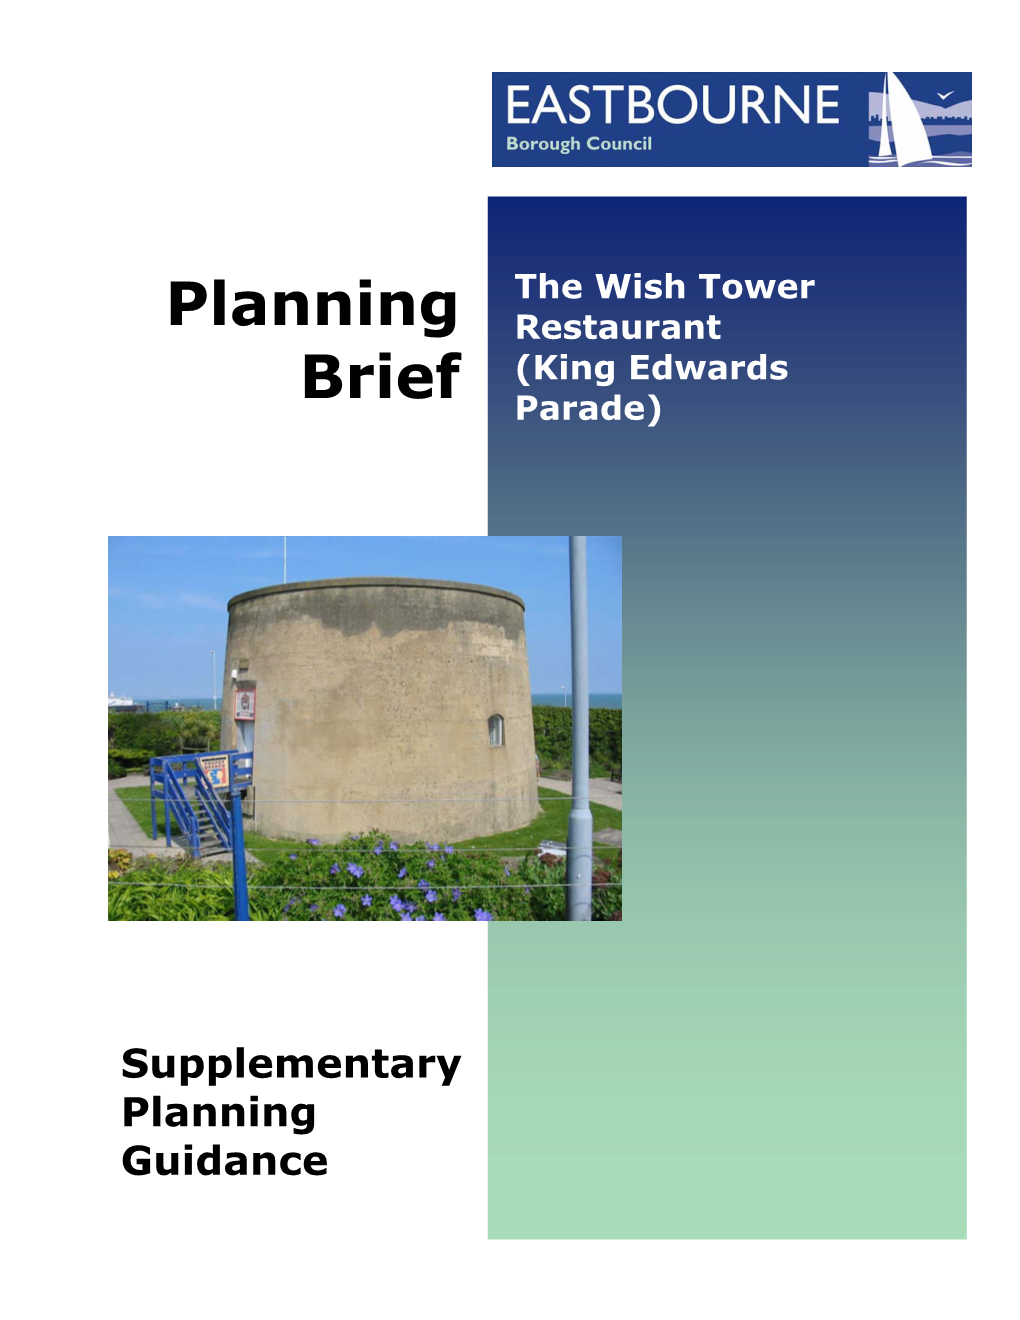 Planning Brief for the Wish Tower Restaurant (King Edwards Parade)